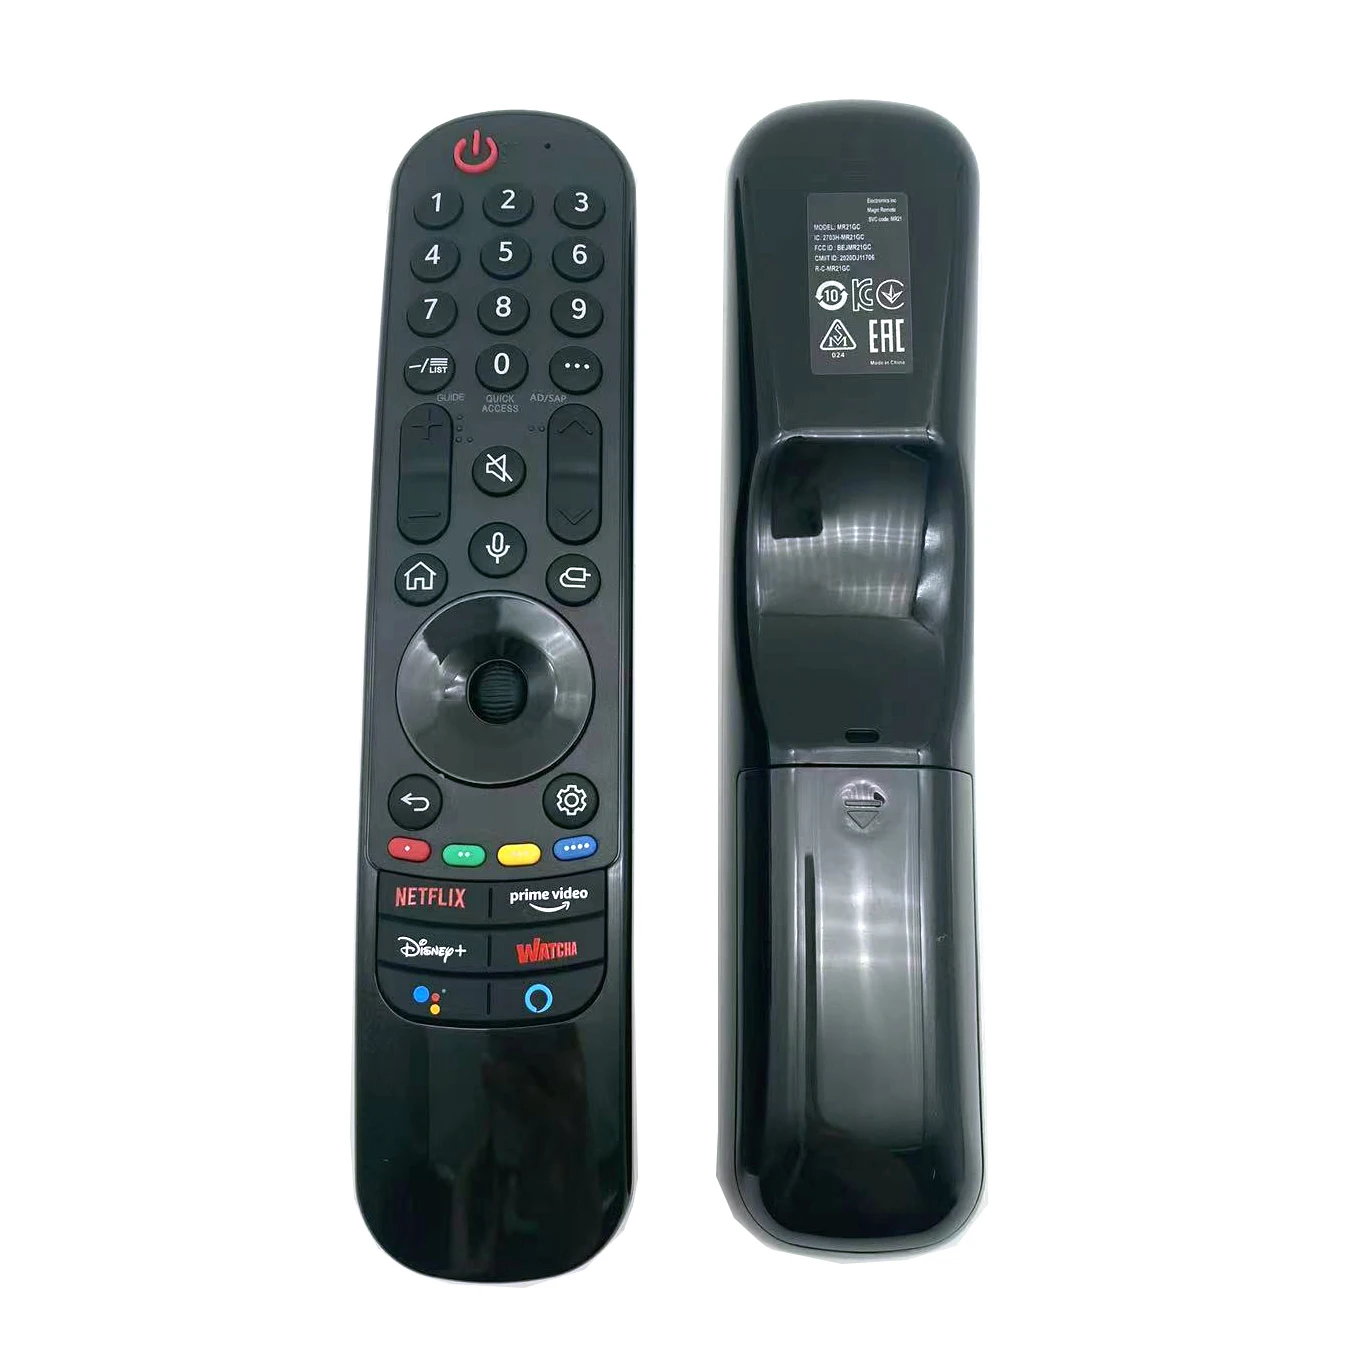 AN-MR21GC FOR LG Smart Replacement TV Remote OLED65C1PUB 65 C1 Series 4K OLED TV (2021) with Netflix Prime Video Disney+ WATCHA